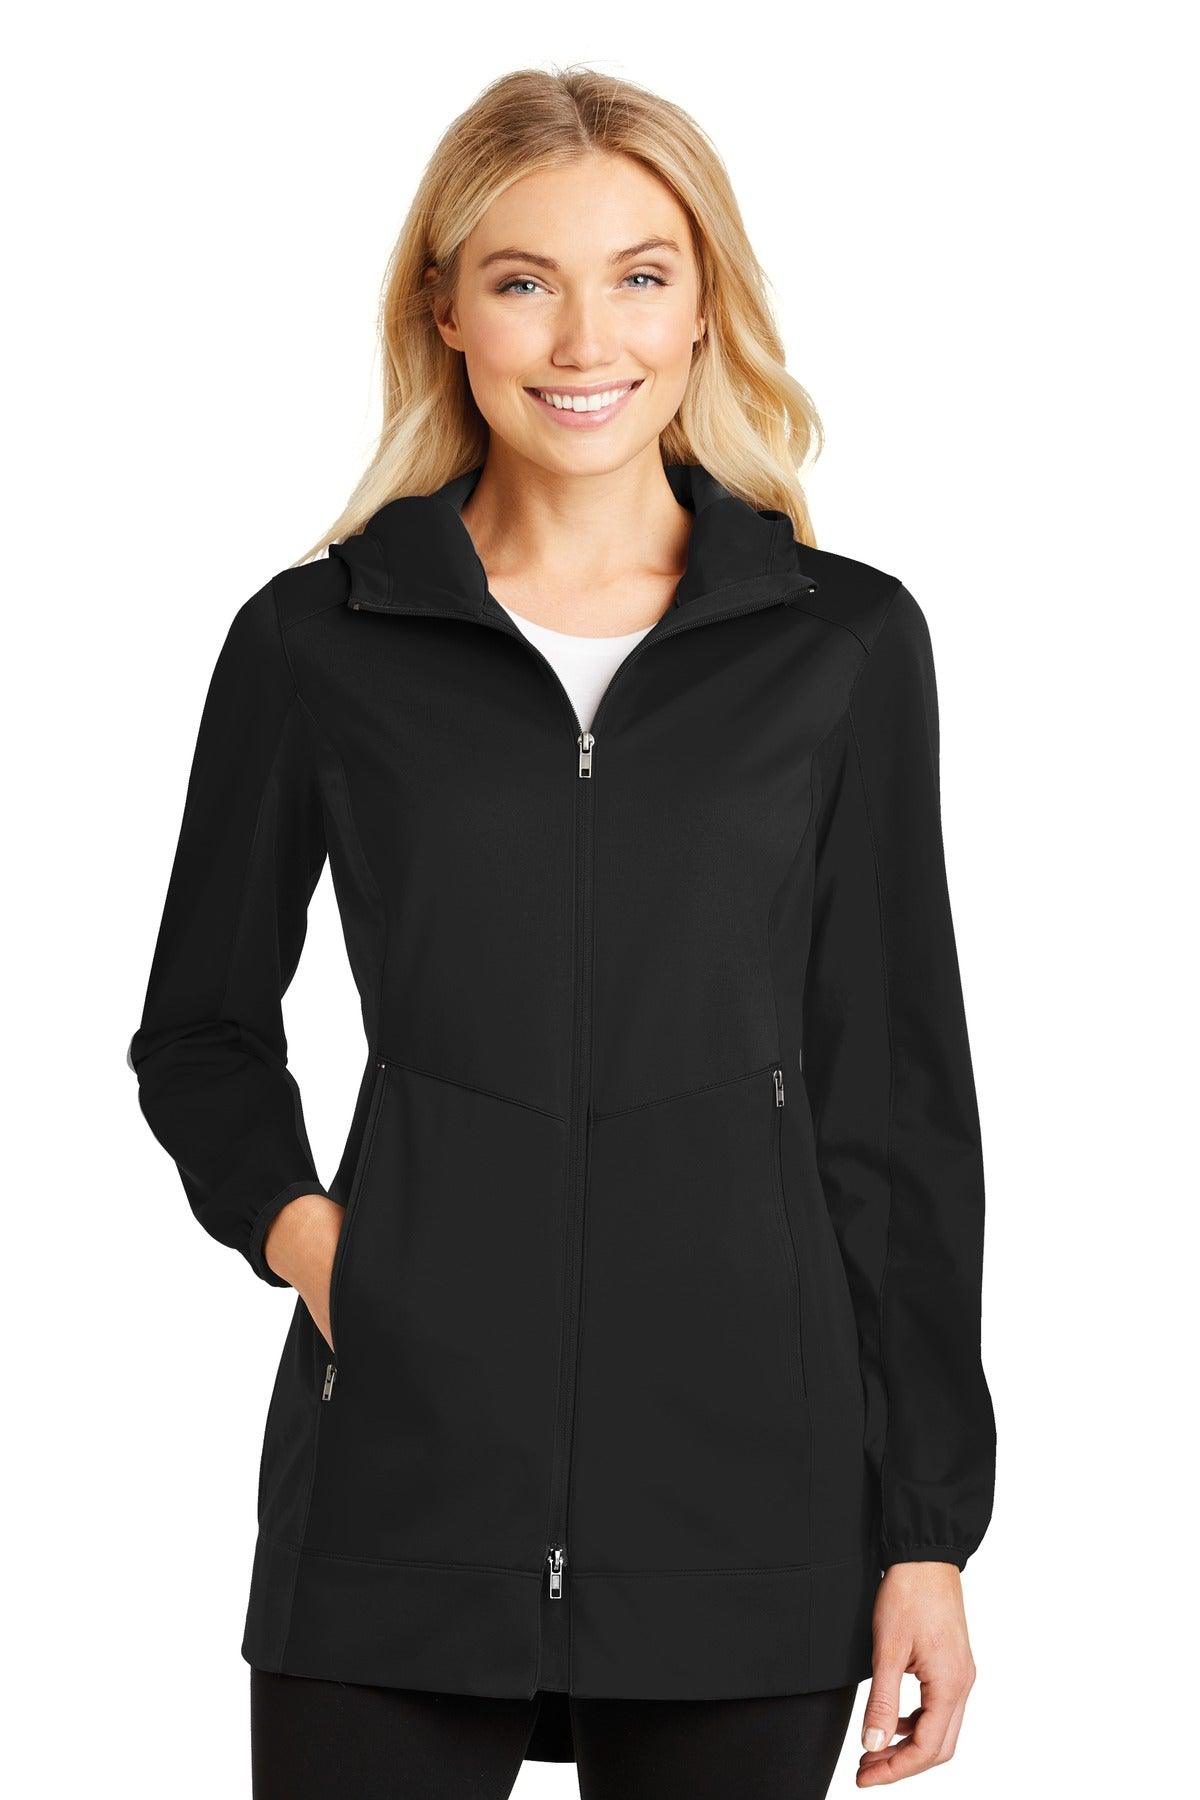 Port Authority Ladies Active Hooded Soft Shell Jacket. L719 - Dresses Max